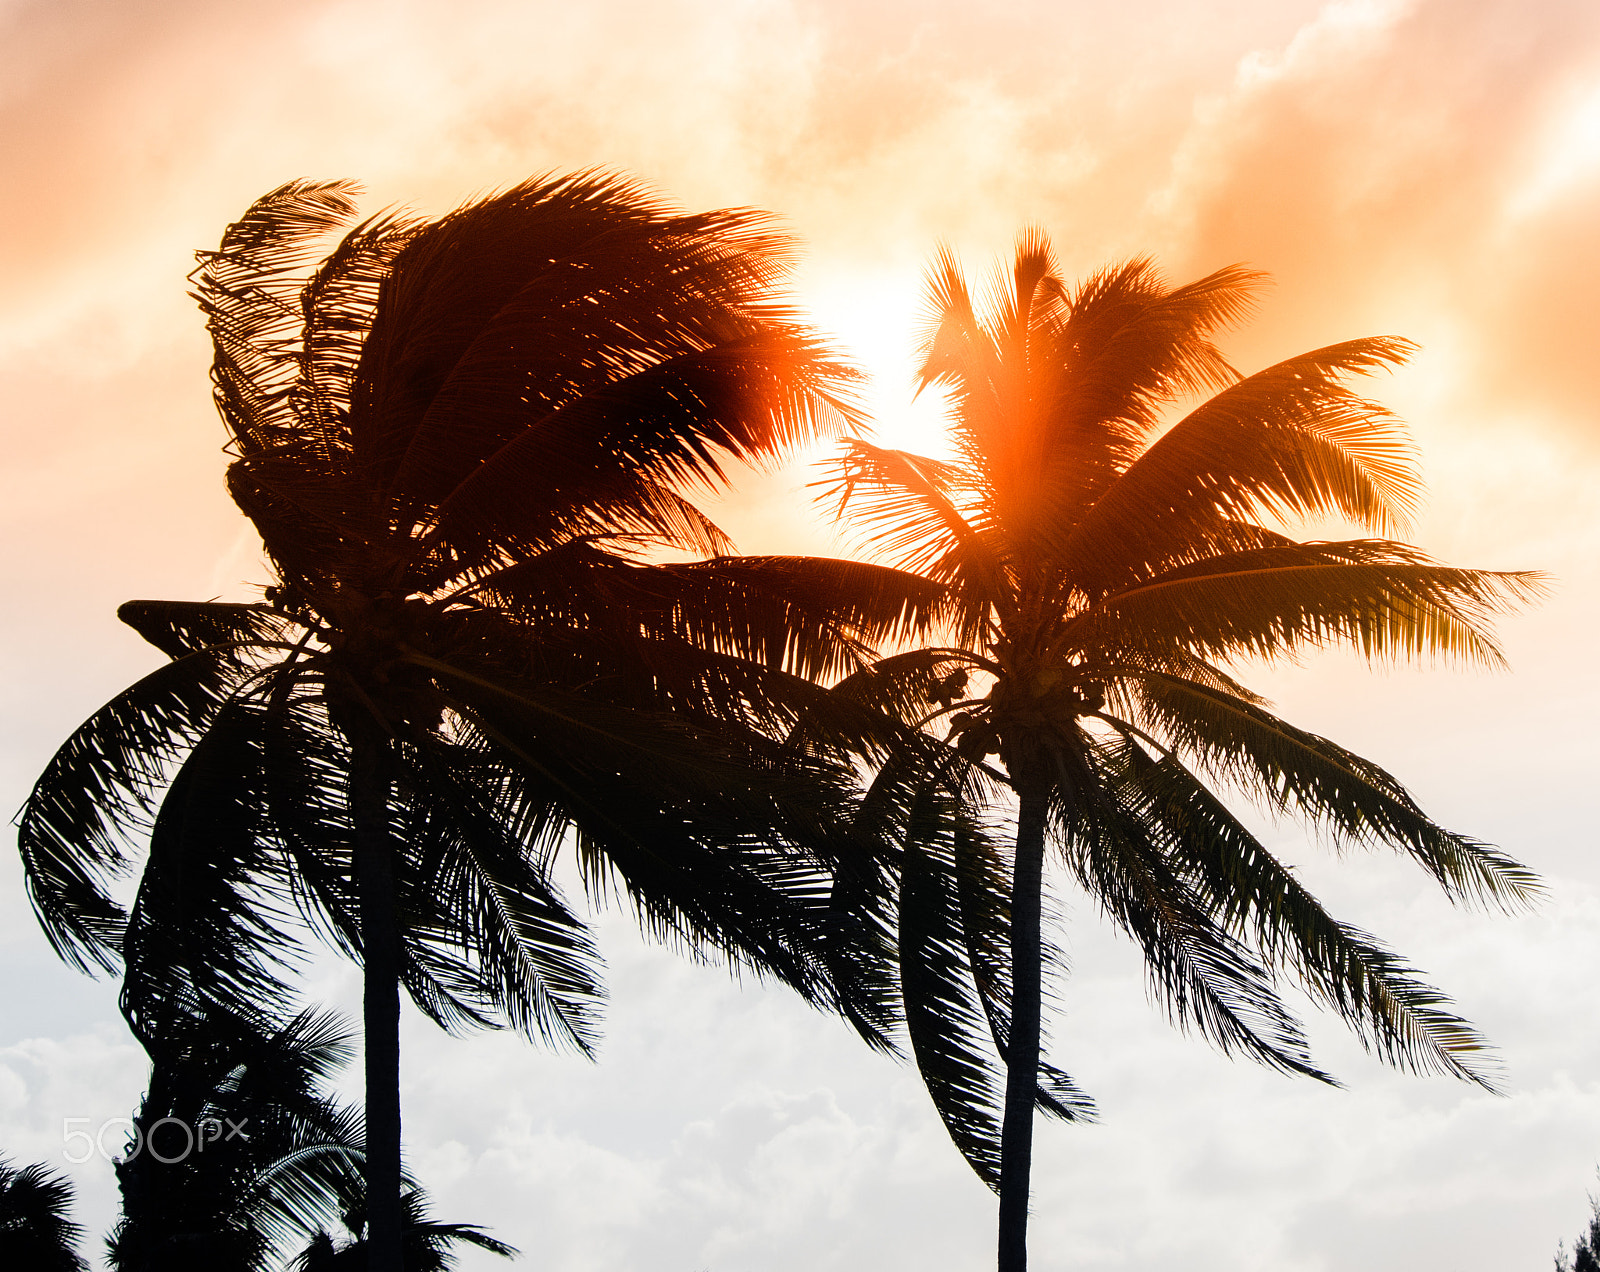 Pentax K-3 II sample photo. Two coco palm trees sunset photography